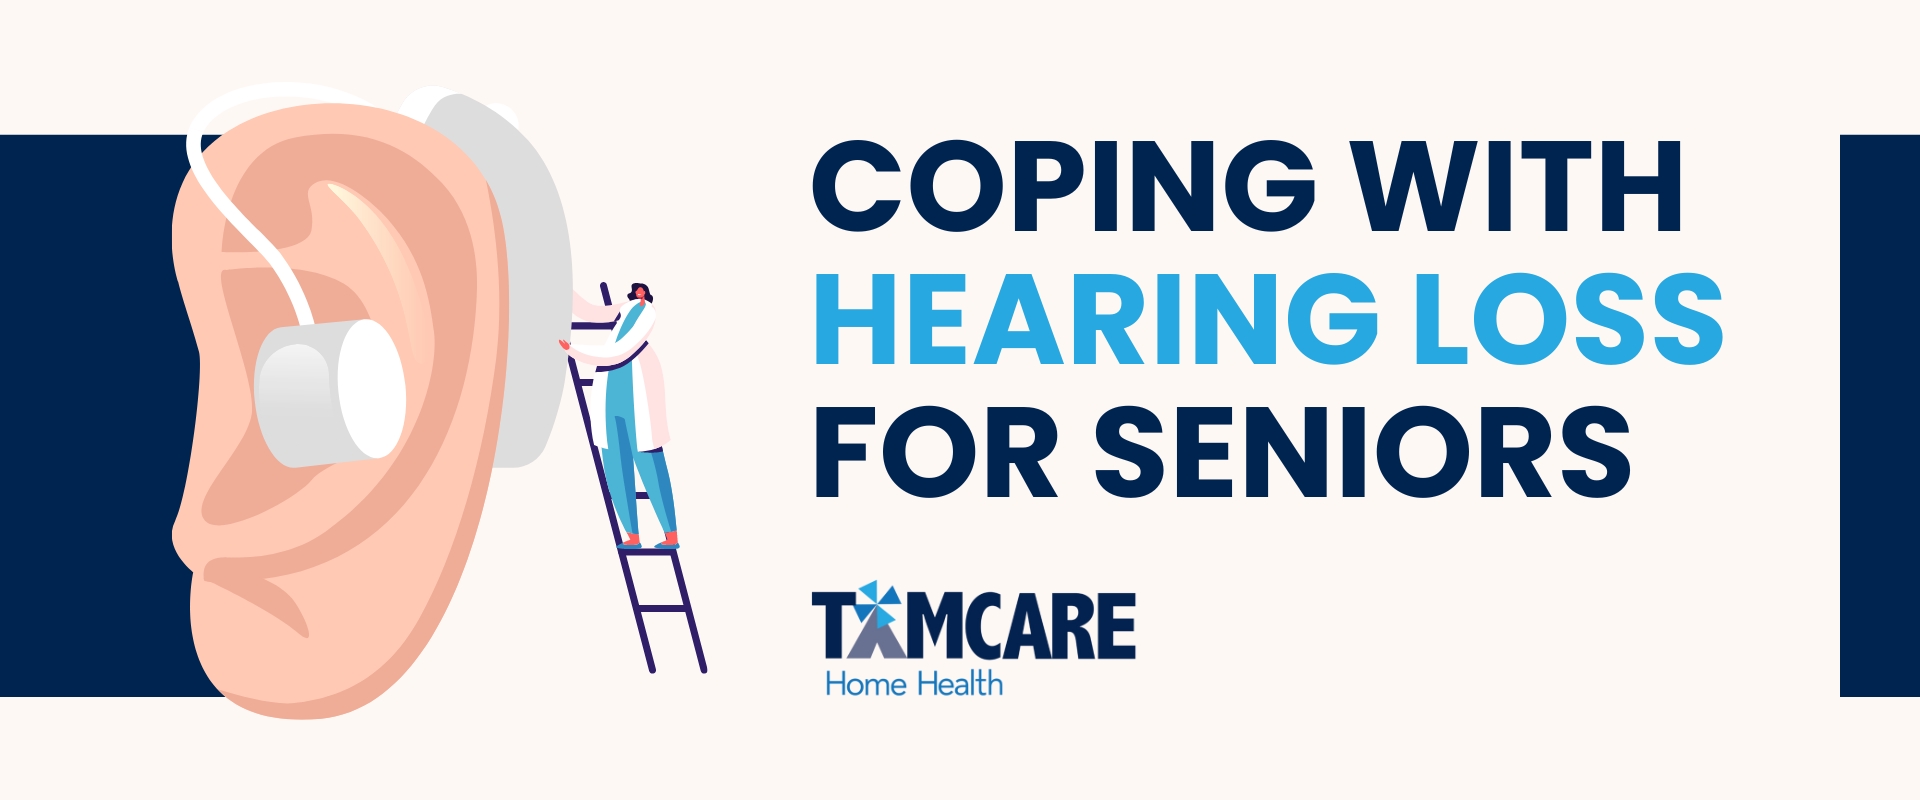 Coping with hearing loss for seniors by TAMCARE Home Health